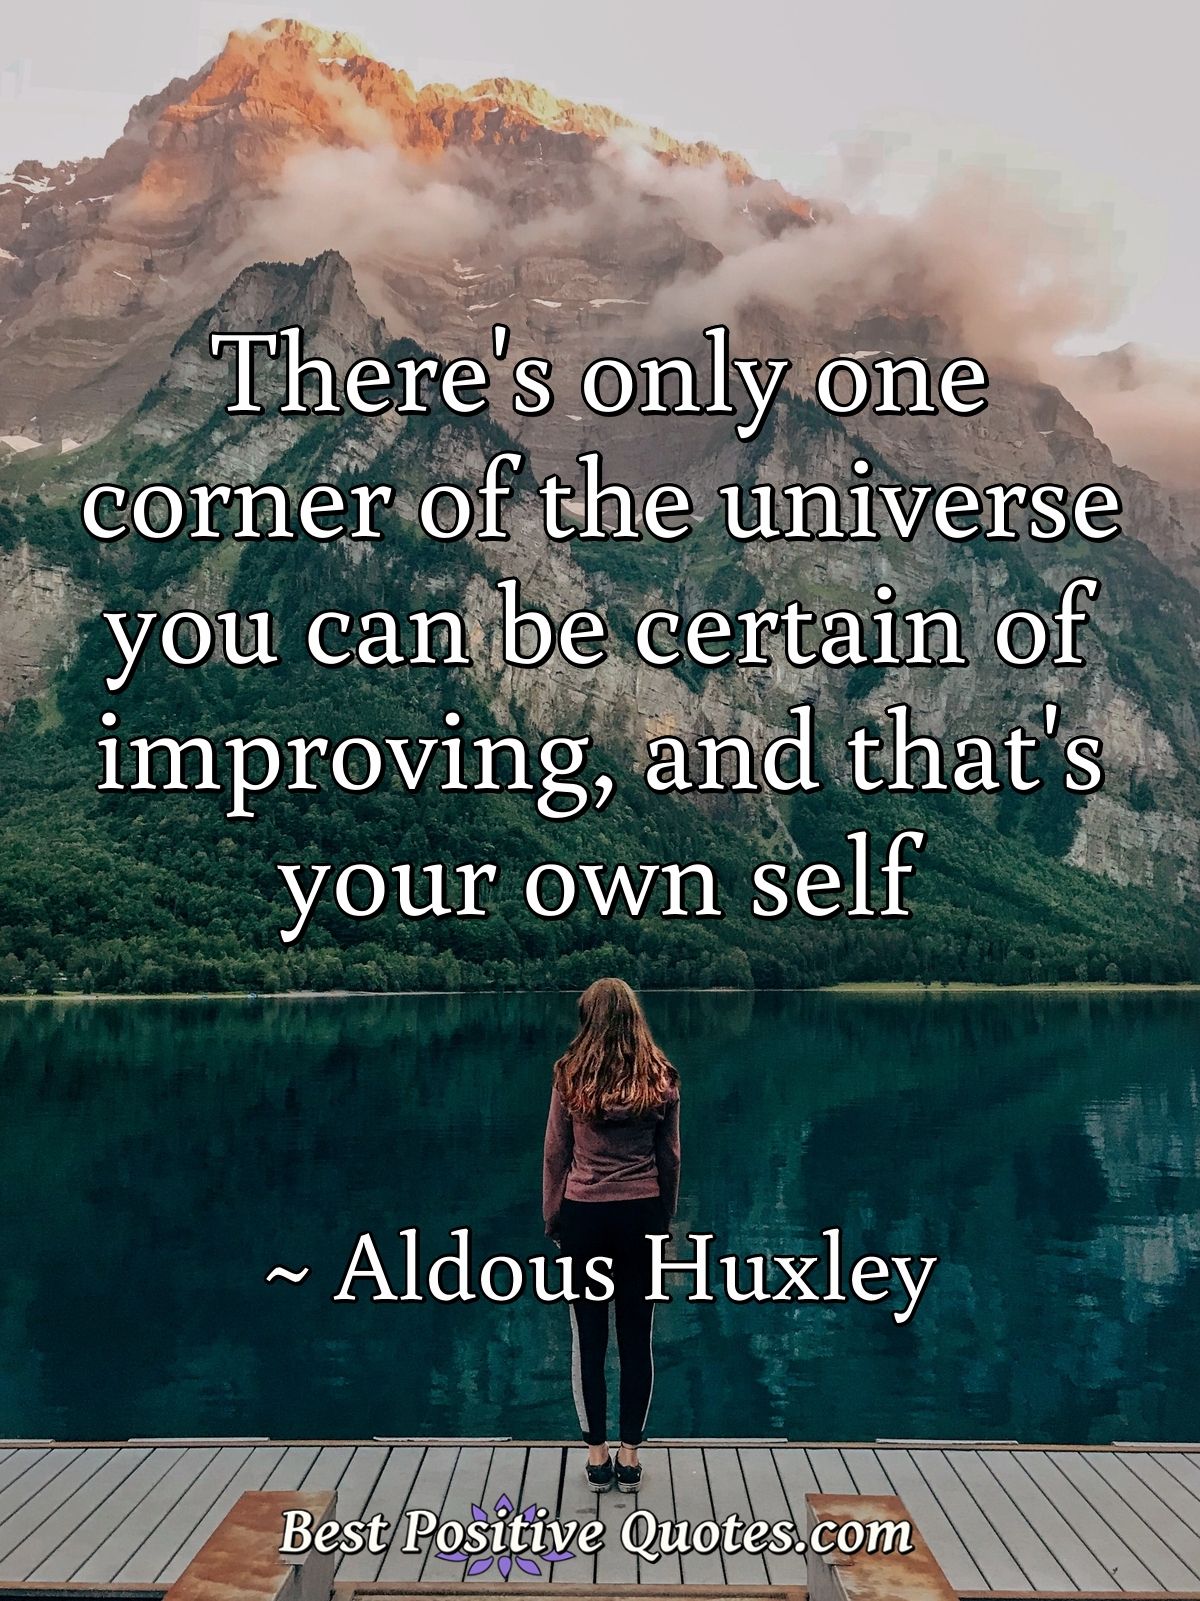 There's only one corner of the universe you can be certain of improving, and that's your own self - Aldous Huxley